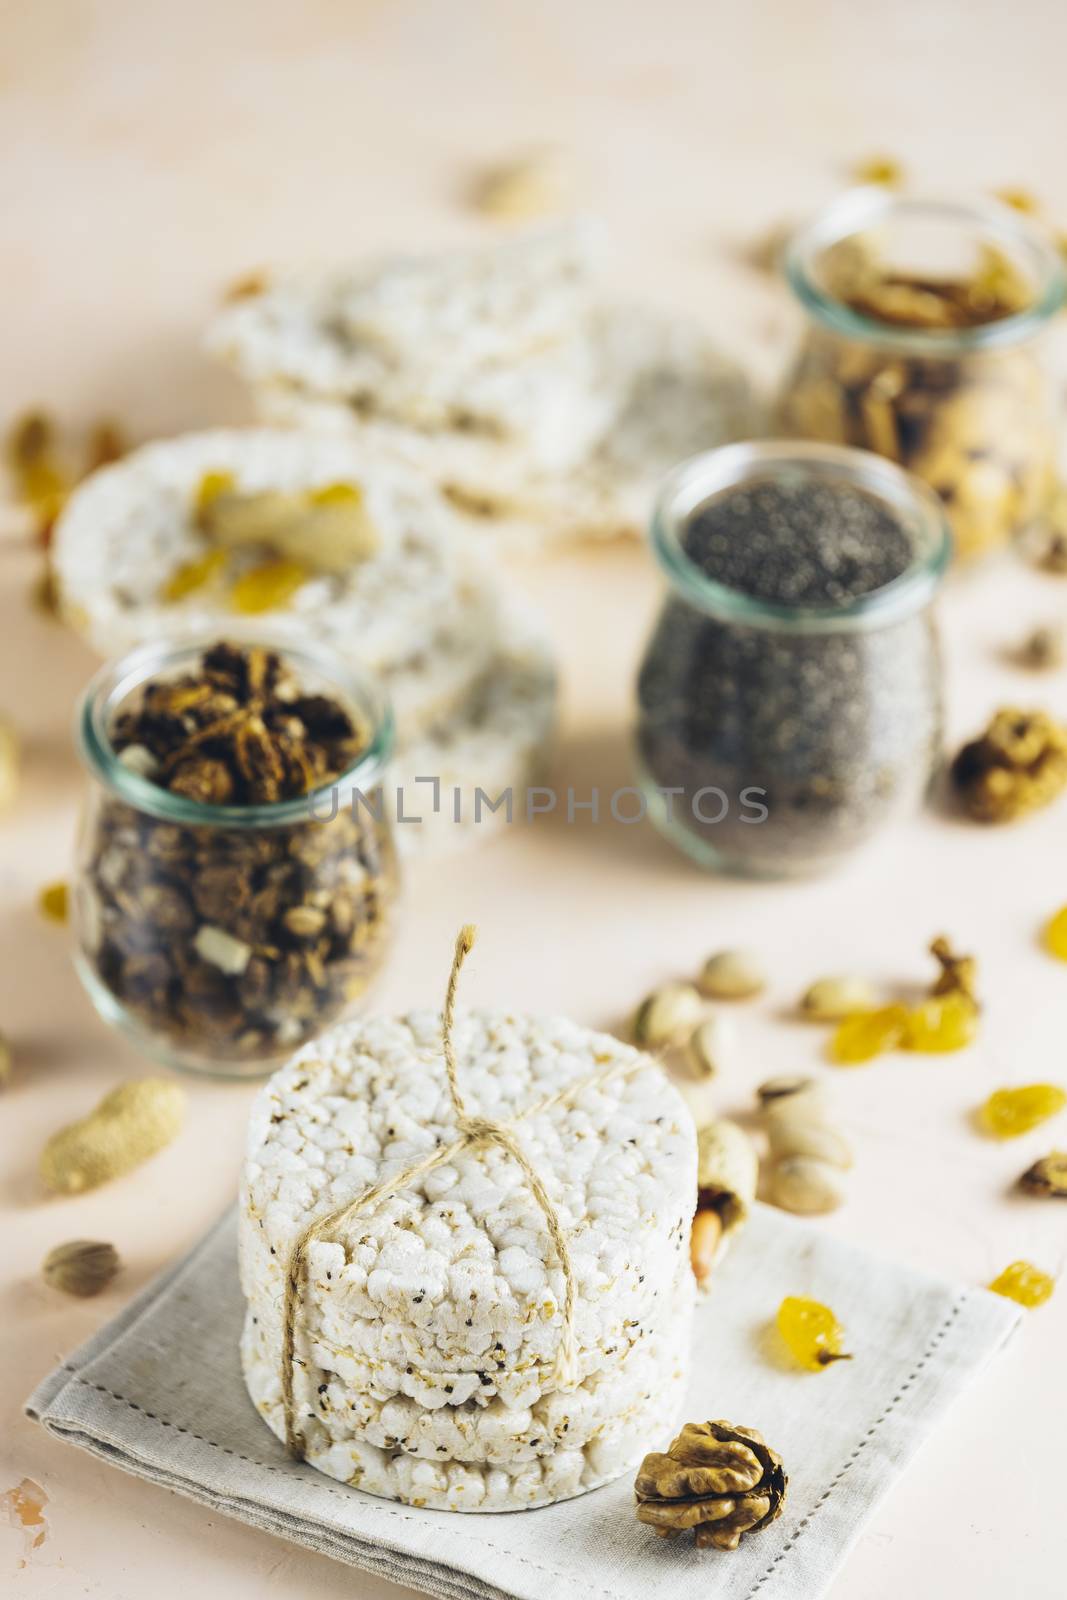 American puffed rice cakes. Healthy snacks with almonds, raisins, peanuts, pistachios in glass jars on light pink concrete surface.